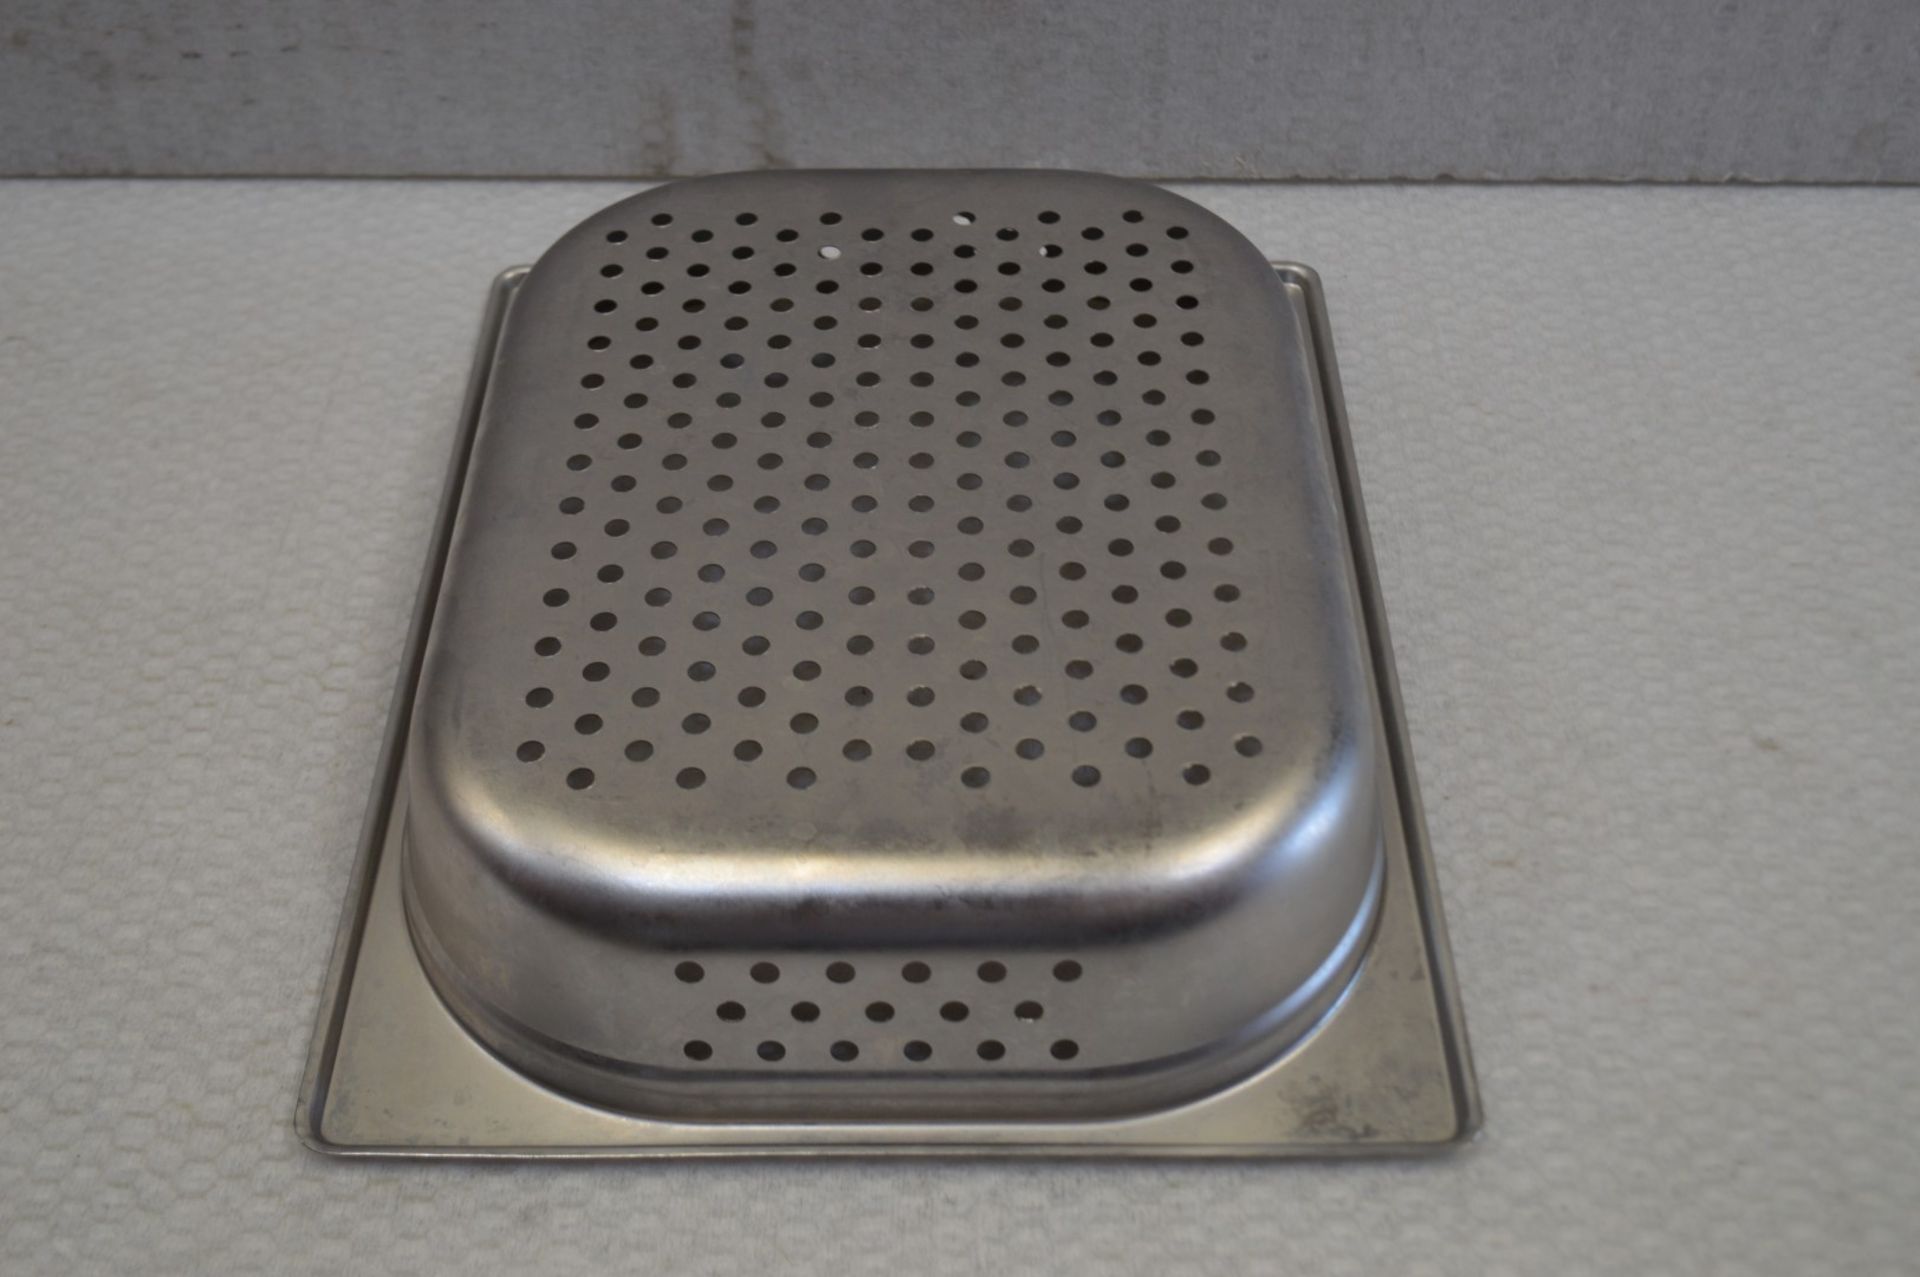 10 x Stainless Steel Gastronorm Trays - Dimensions: L33 x W26.5 cm - Includes Perforated and None - Image 4 of 4